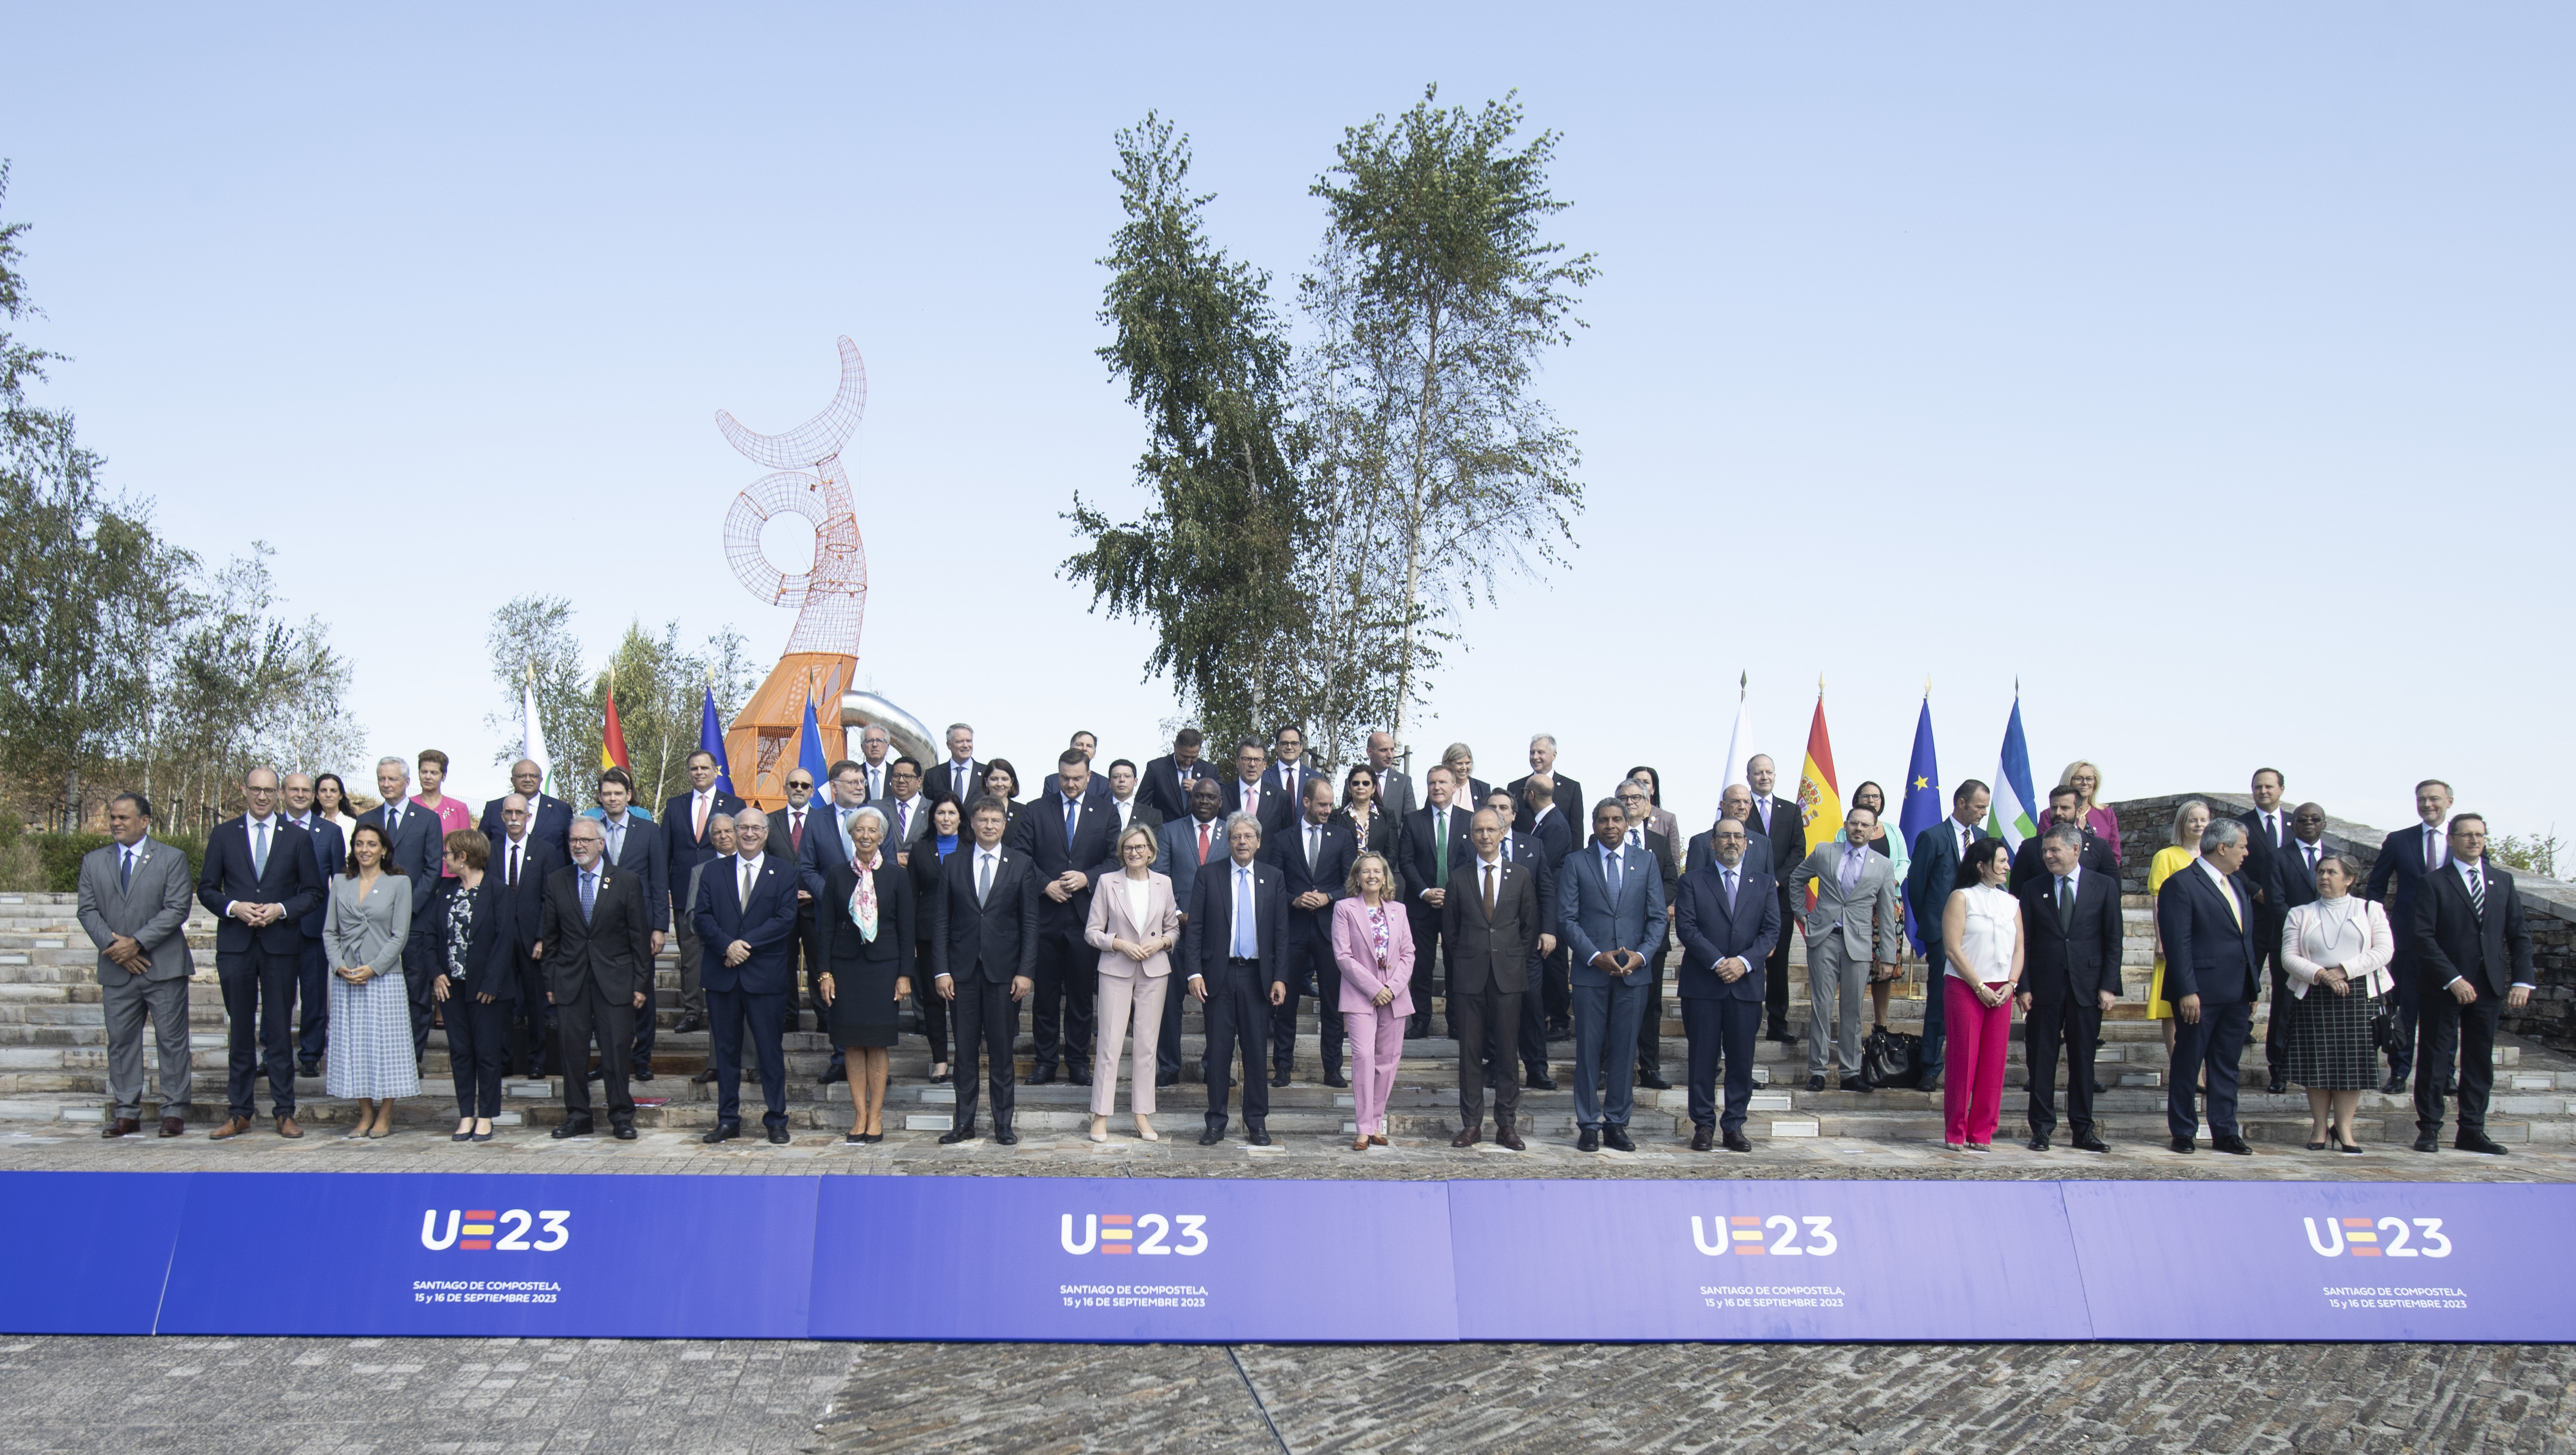 A Historic Meeting for EU-Latin America and Caribbean Relations